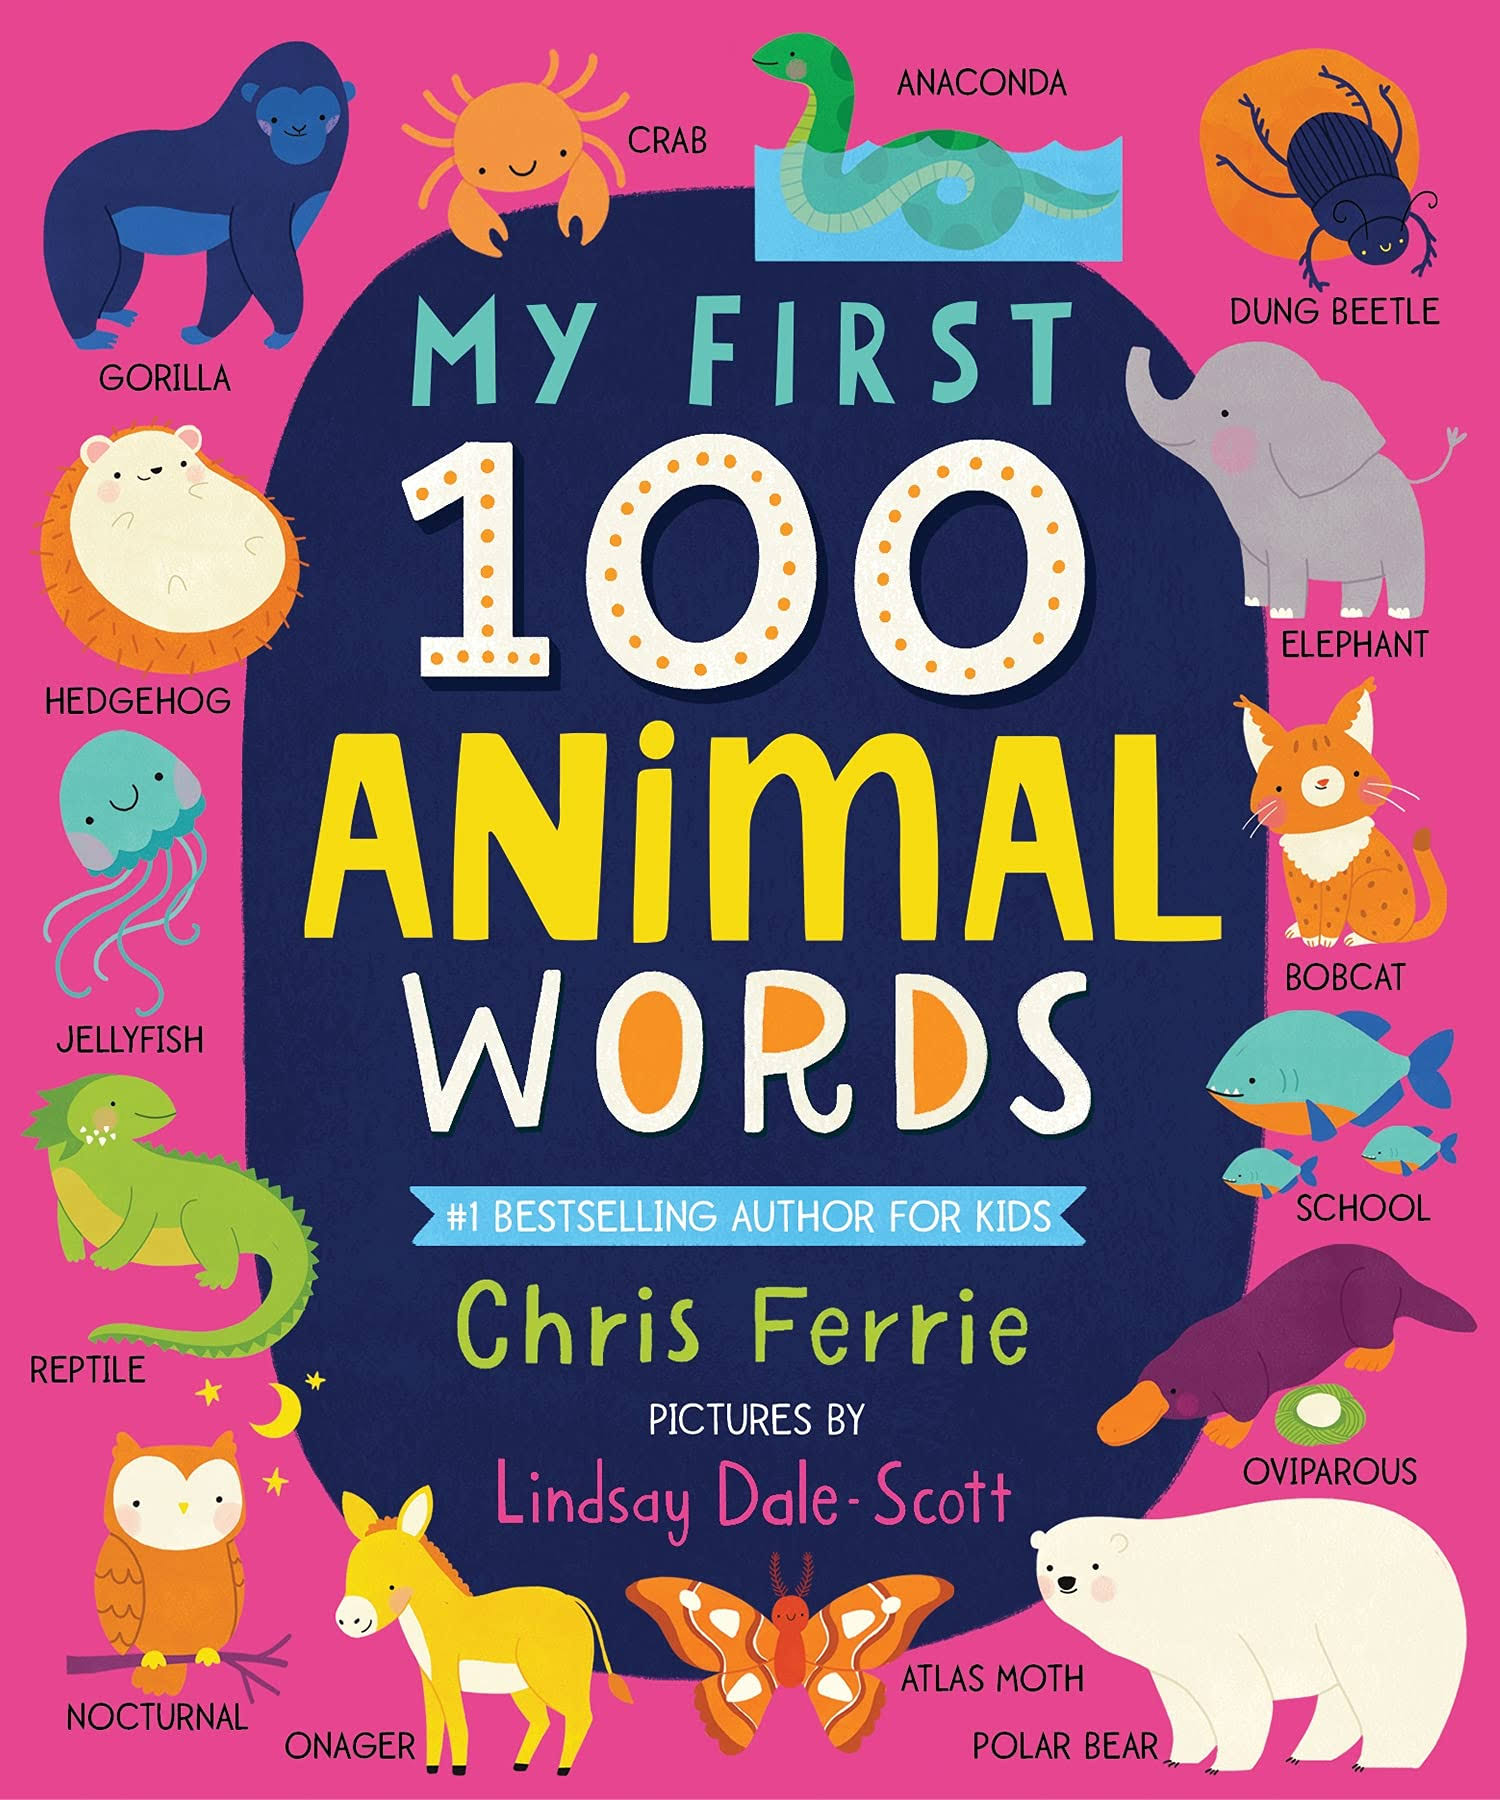 My First 100 Animal Words by Chris Ferrie